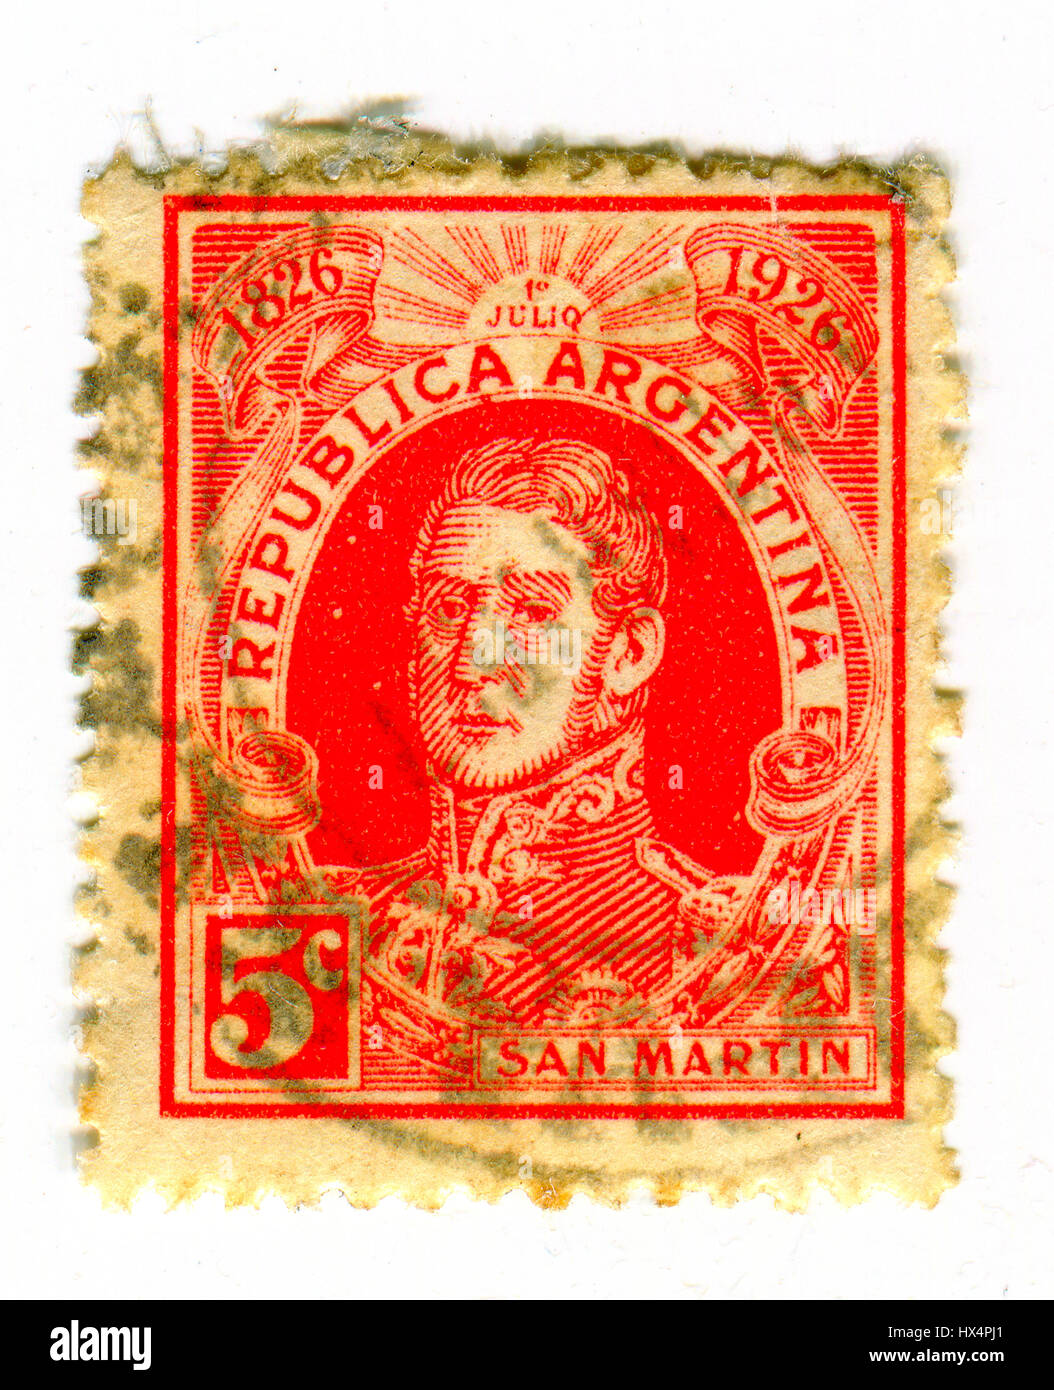 GOMEL, BELARUS, 23 MARCH 2017, Stamp printed in Argentina shows image of theJose Francisco de San Martin y Matorras, was an Argentine general and the  Stock Photo